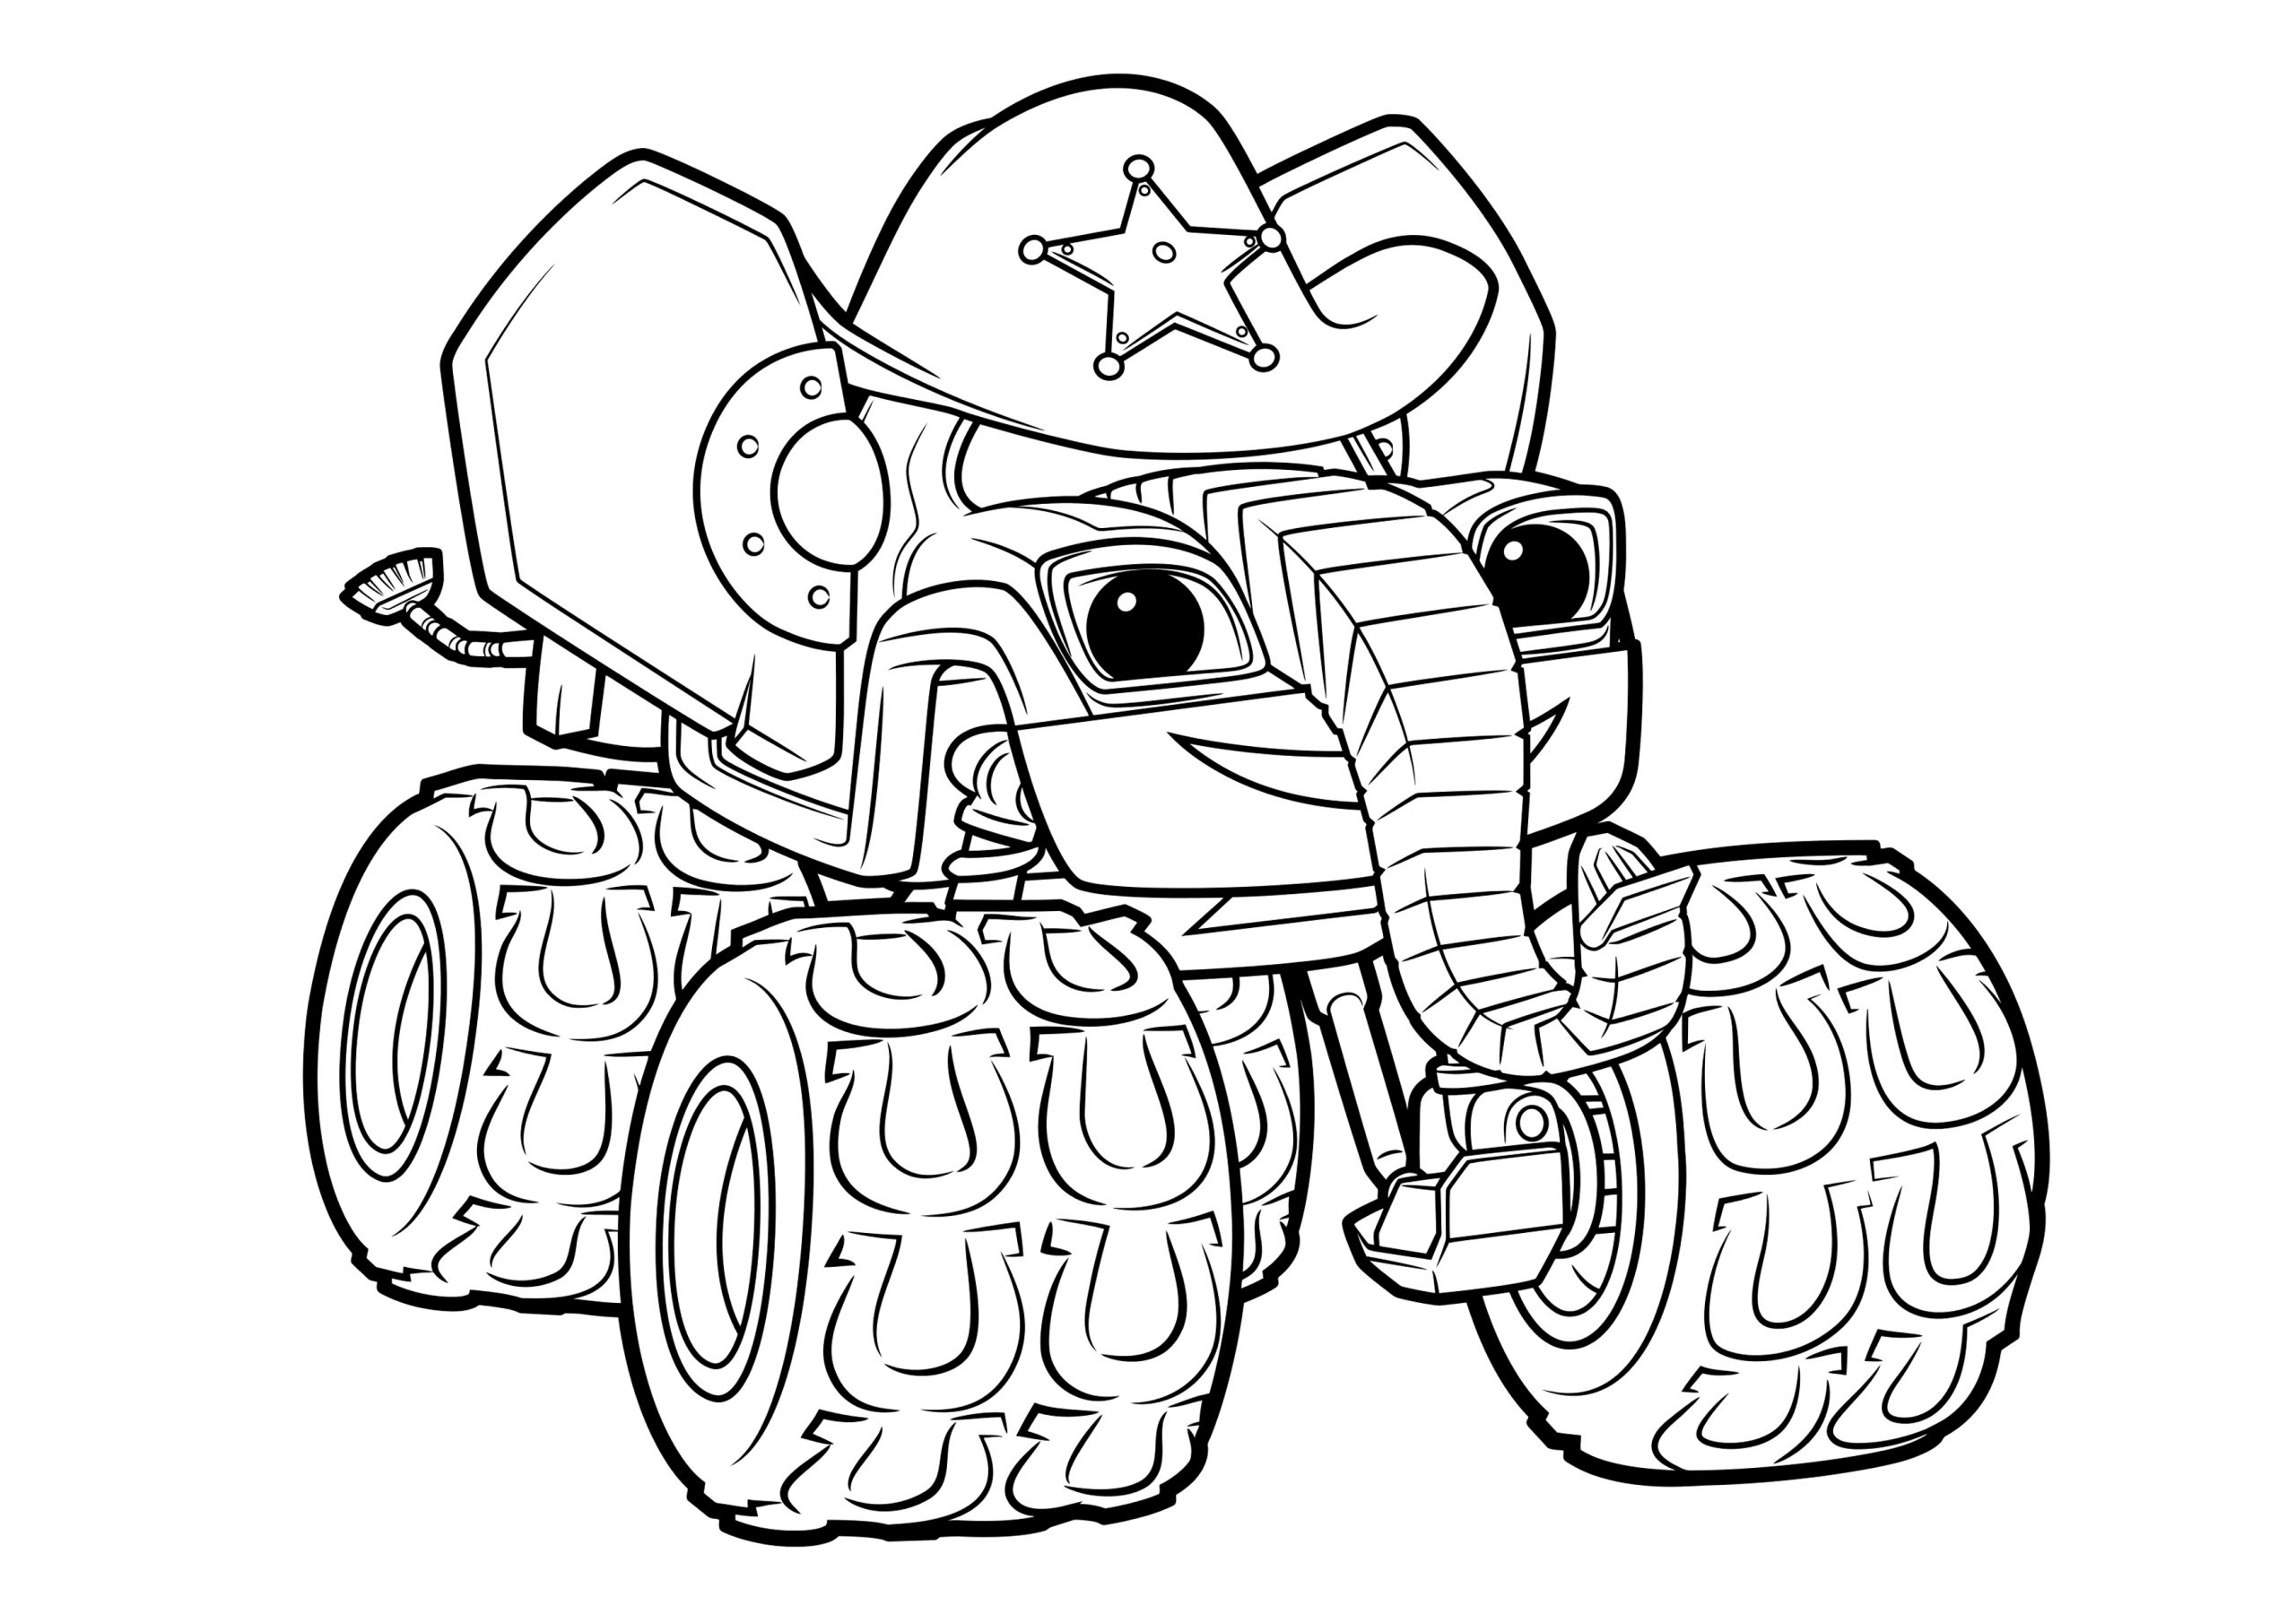 Coloring Sheets : Blaze And The Monster Machines Starla Elephant ...